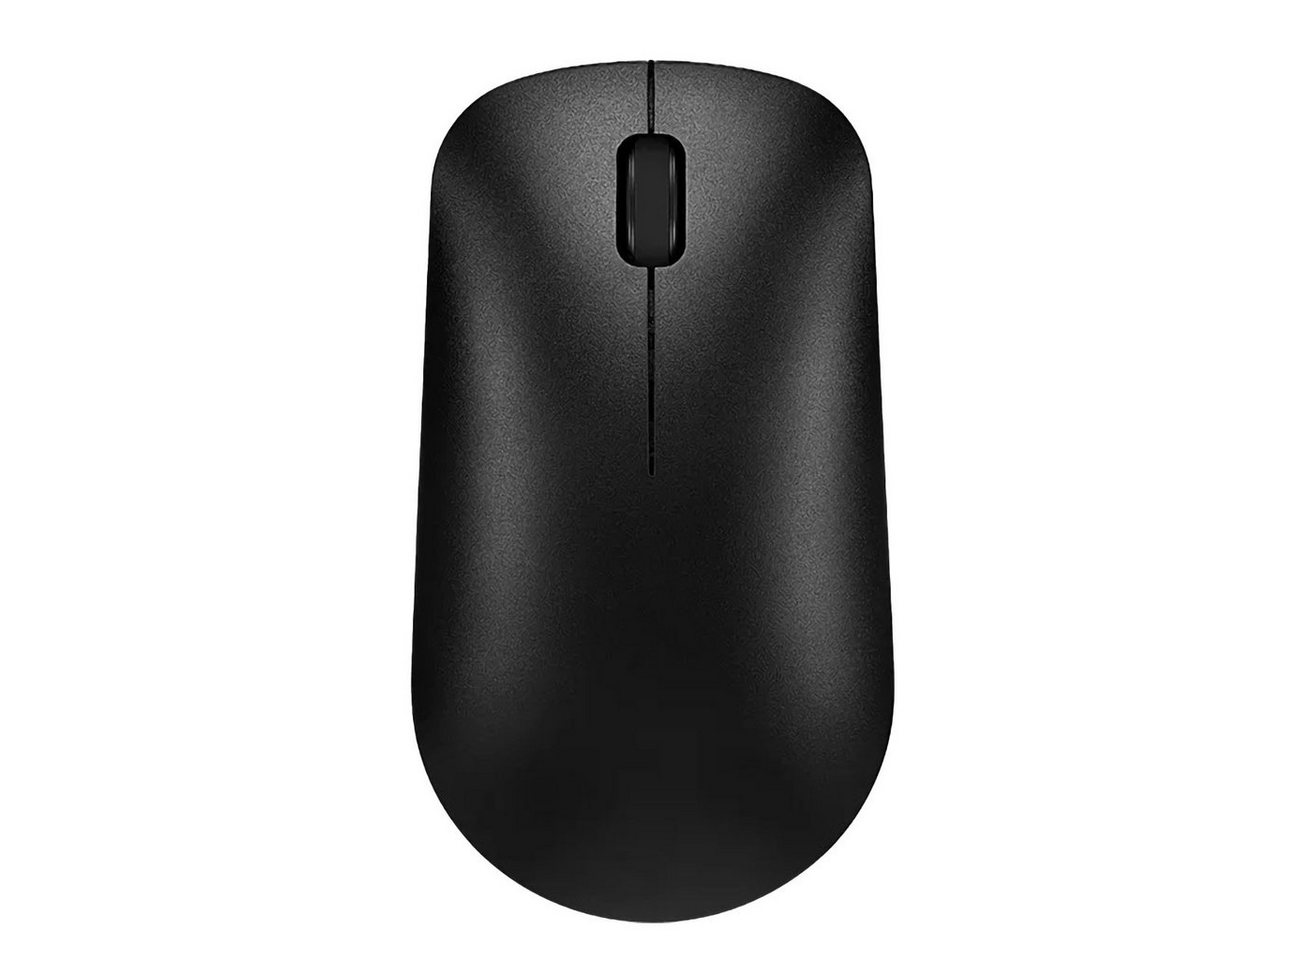 Honor Bluetooth Mouse - Magicbook 2020 Maus von Honor